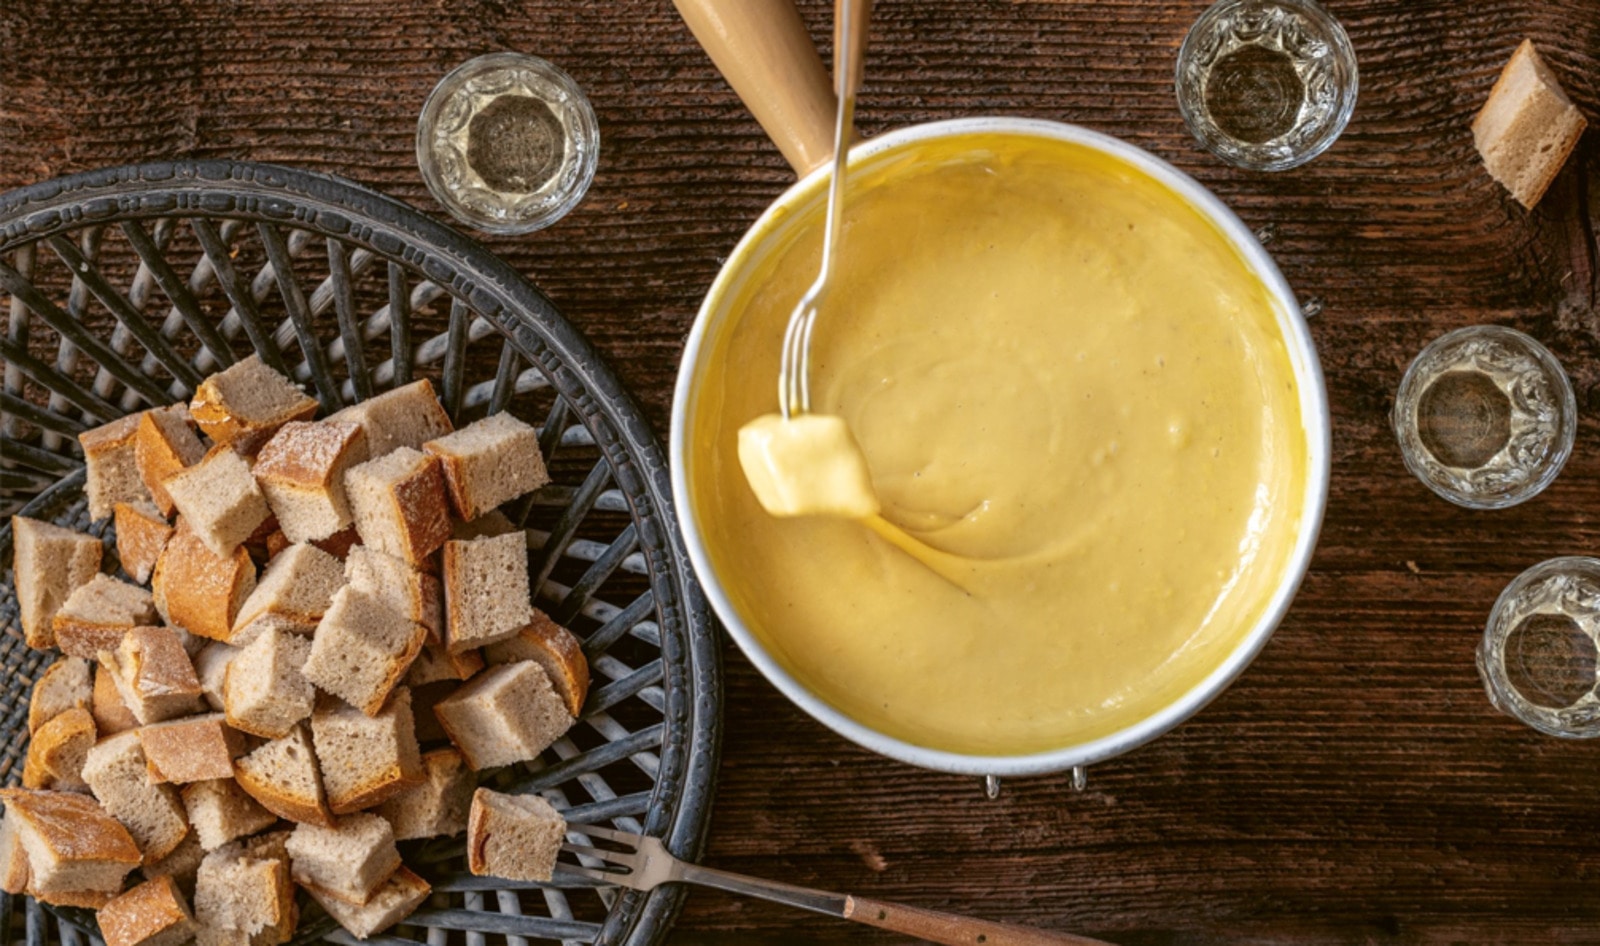 How to Host an Unforgettable Fondue Night: Vegan Cheese, Wine, and More